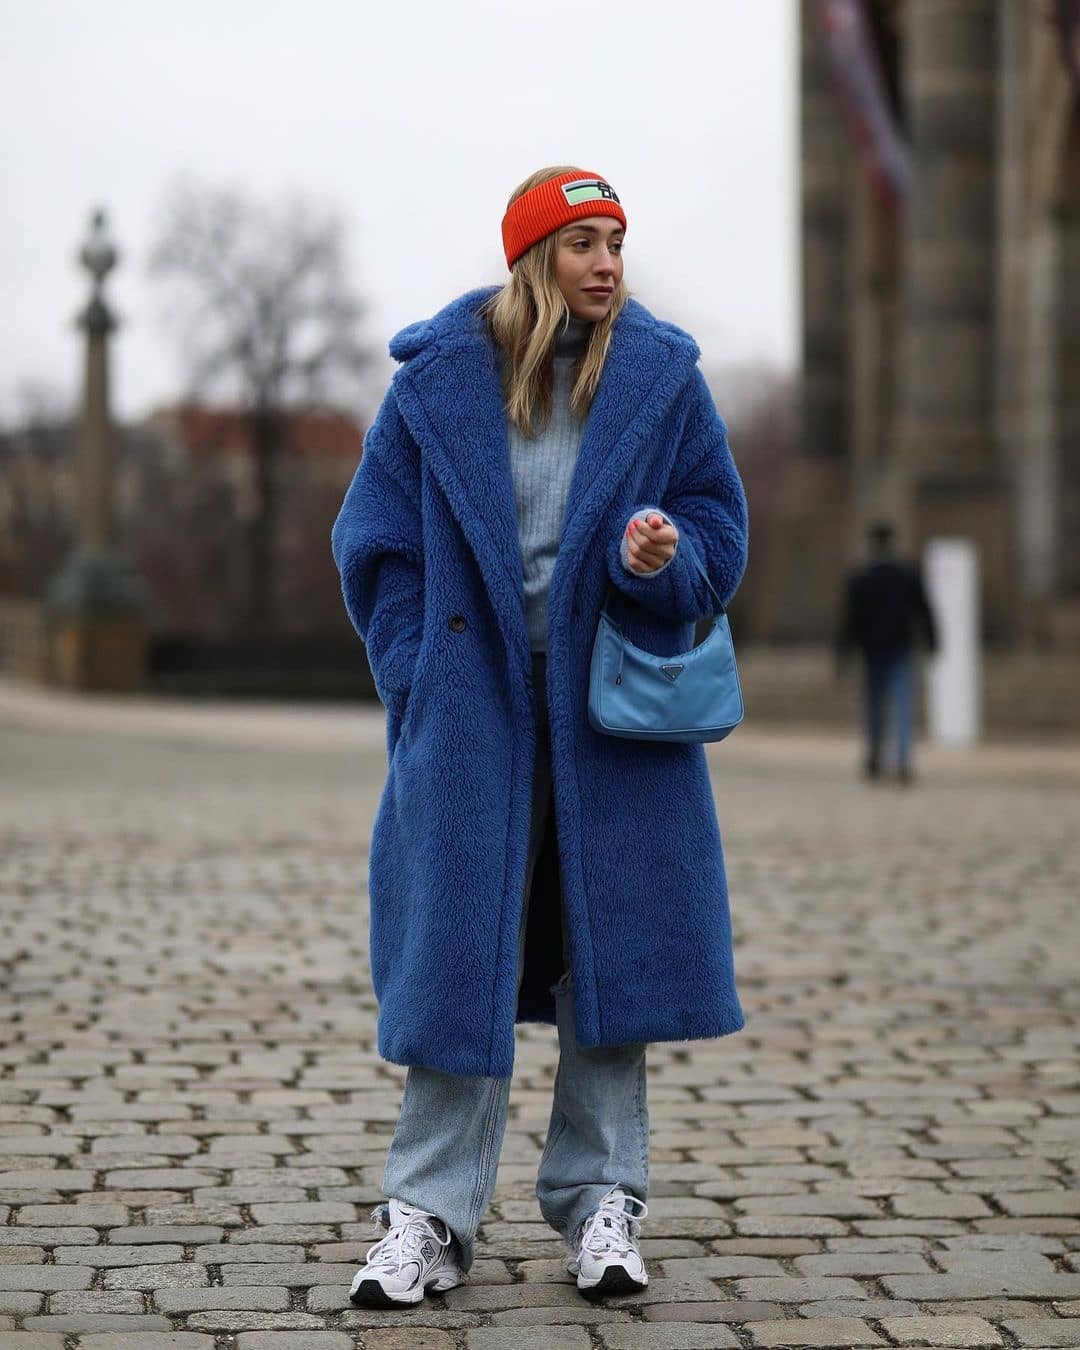 7 ways to wear a blue teddy bear coat this winter | Melody Jacob